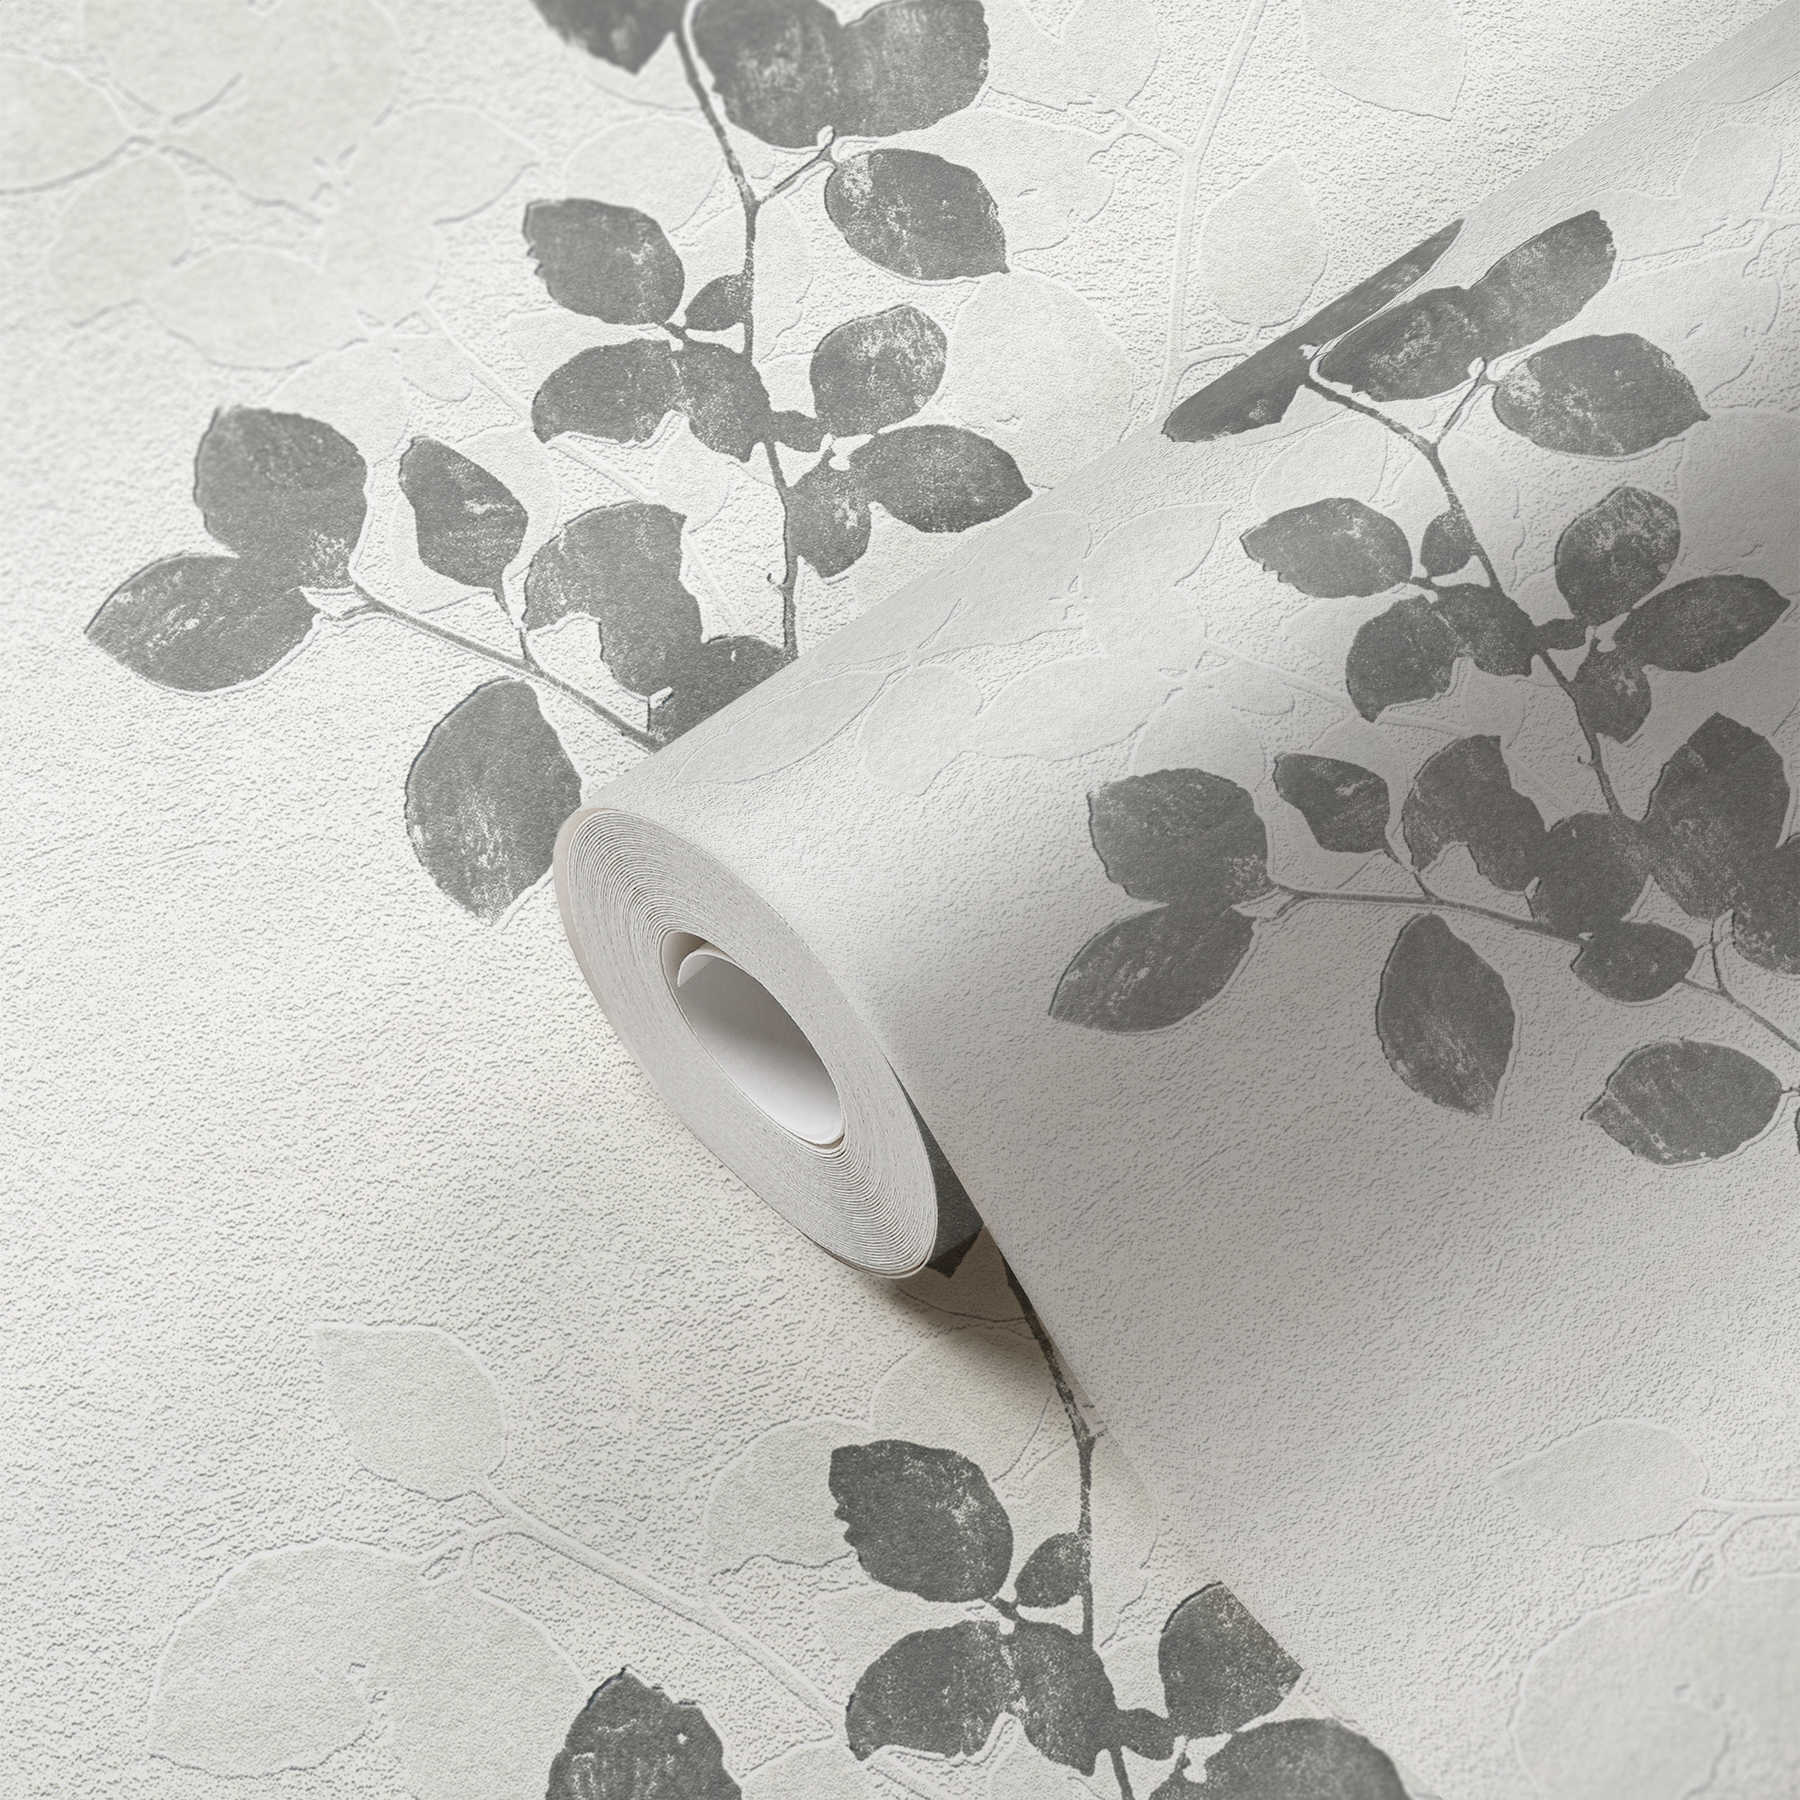             Nature design wallpaper with leaves & texture effect - cream
        